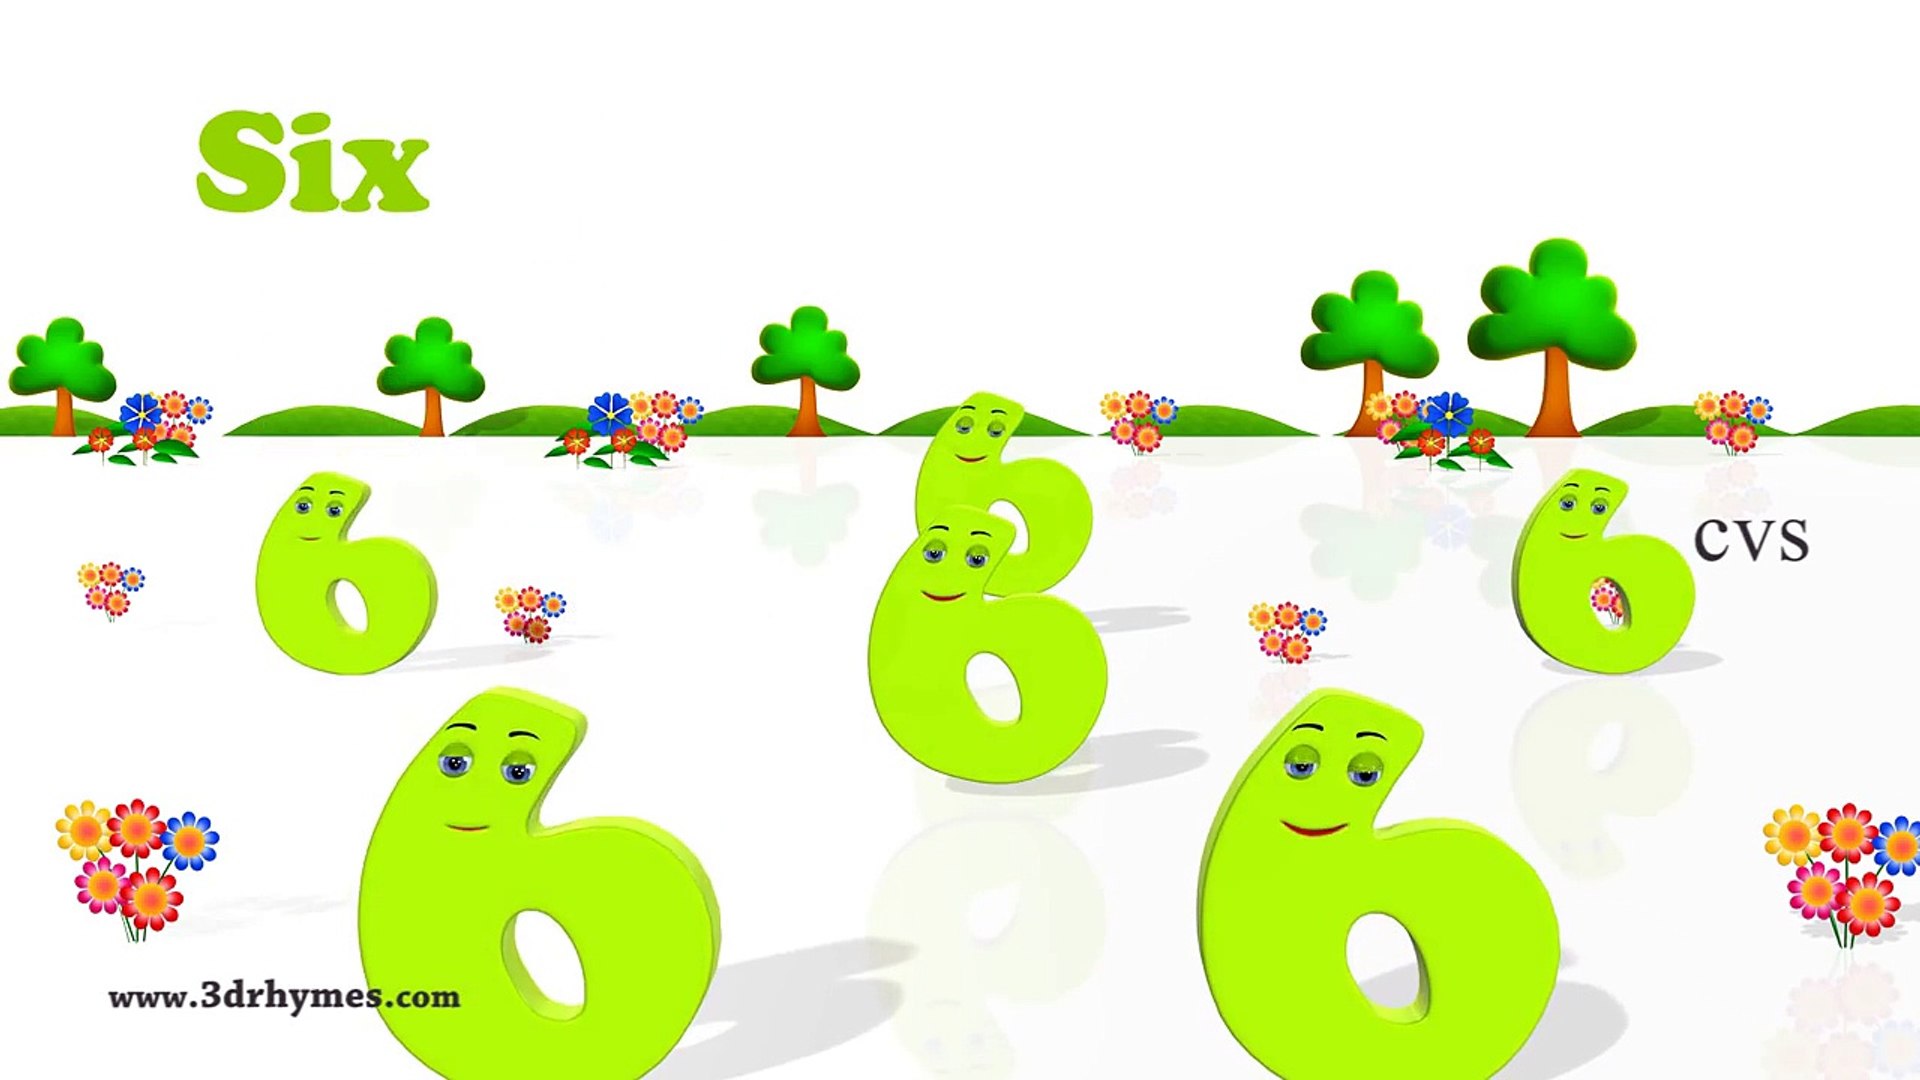 Counting Numbers from 1 to 100  Learning Numbers for Kids 